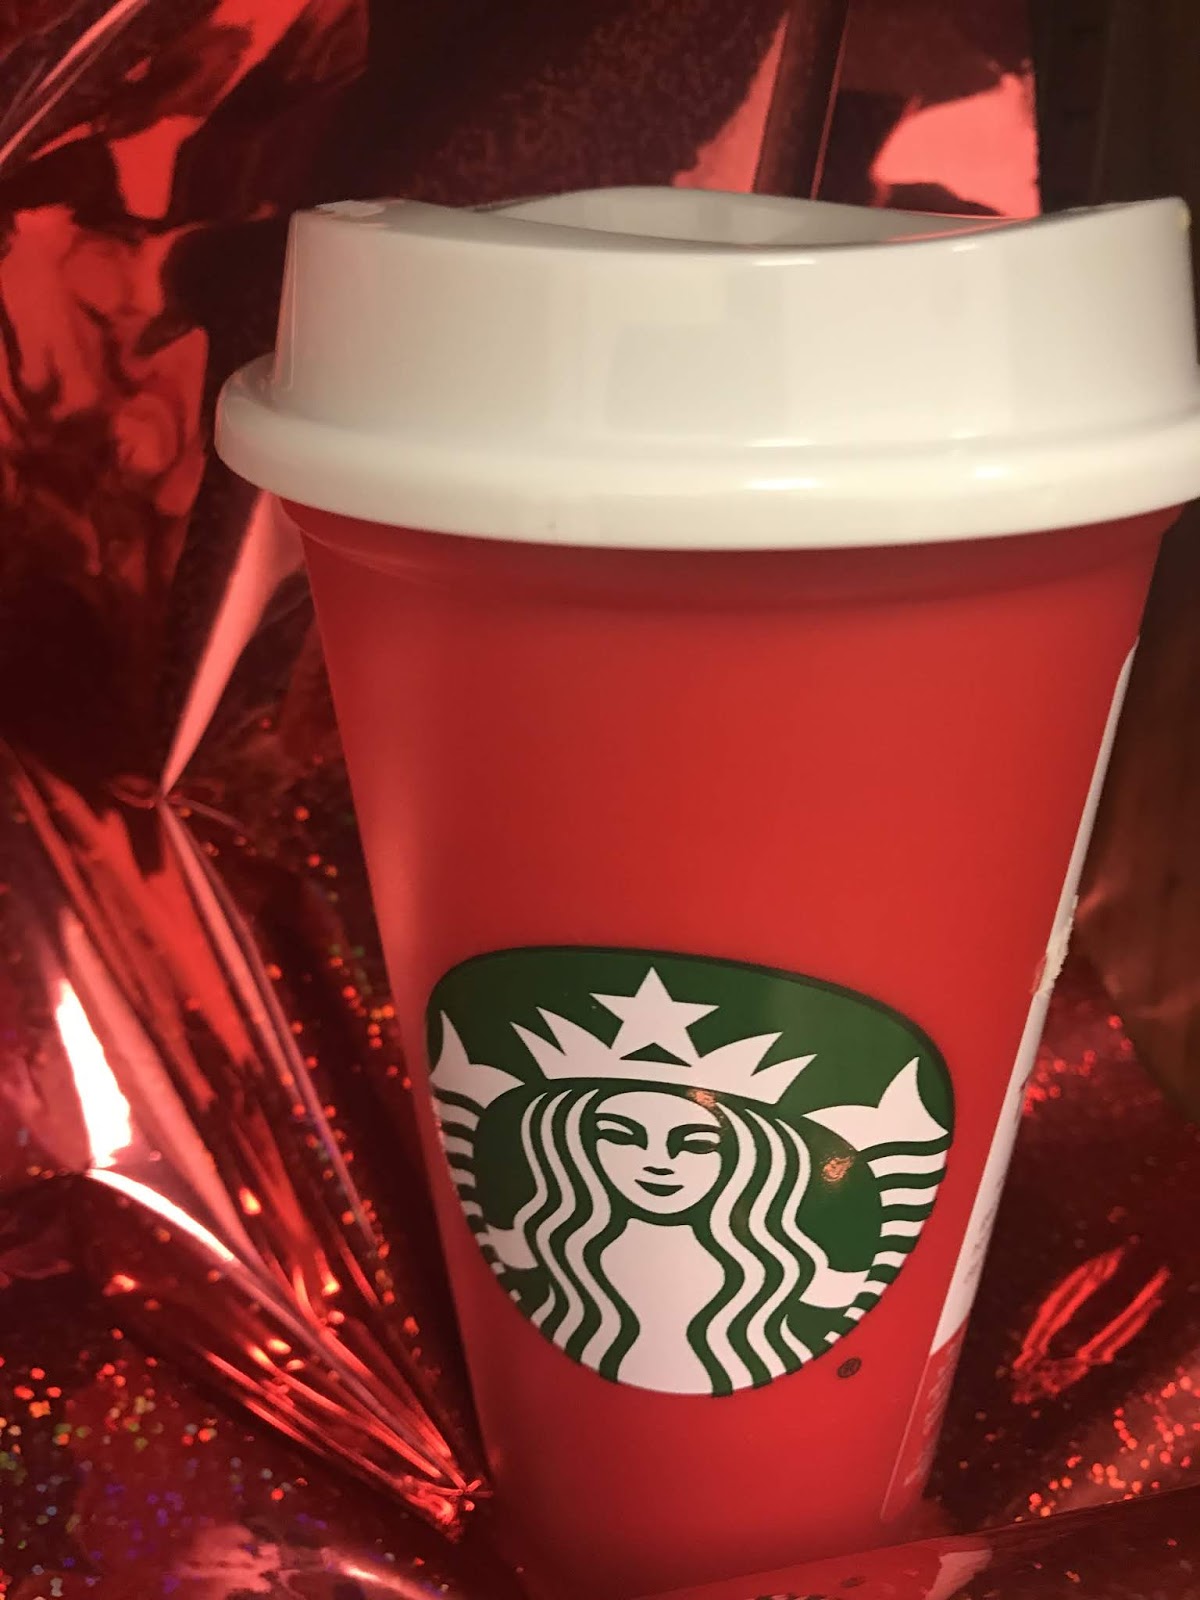 Starbucks Holiday Cups Are Here and We've Got a Starbucks